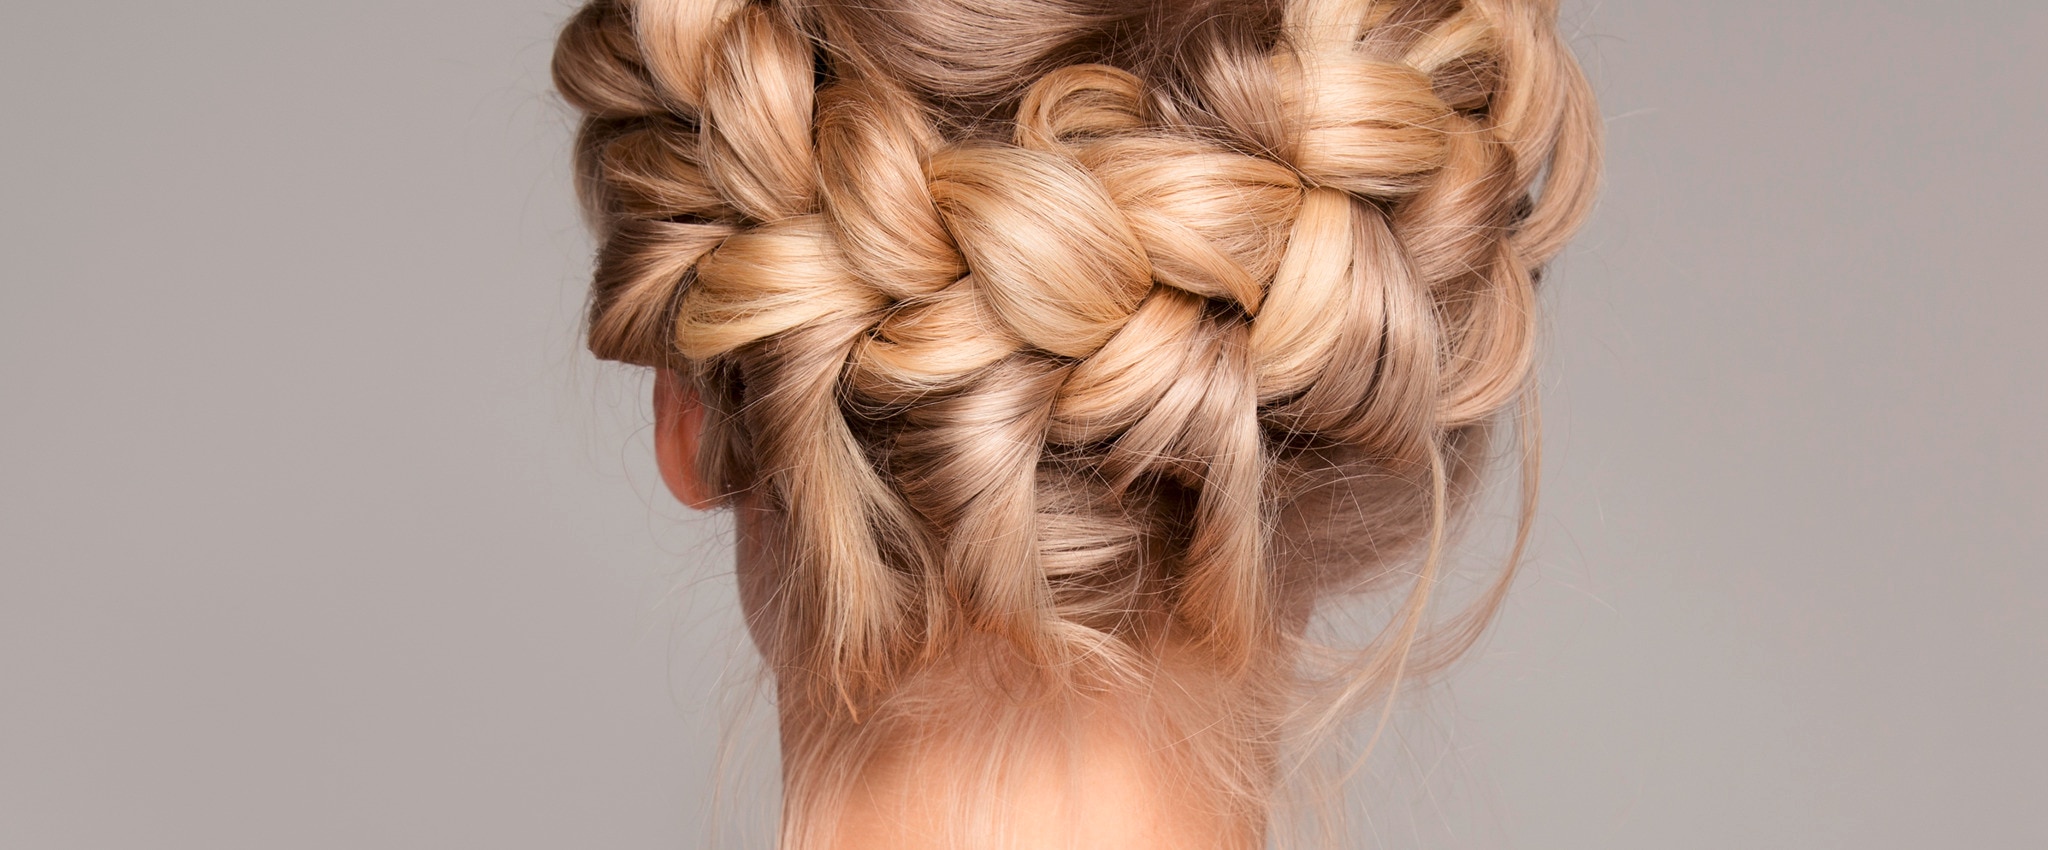 28 Gorgeous Formal Half Updos You'll Fall In Love With